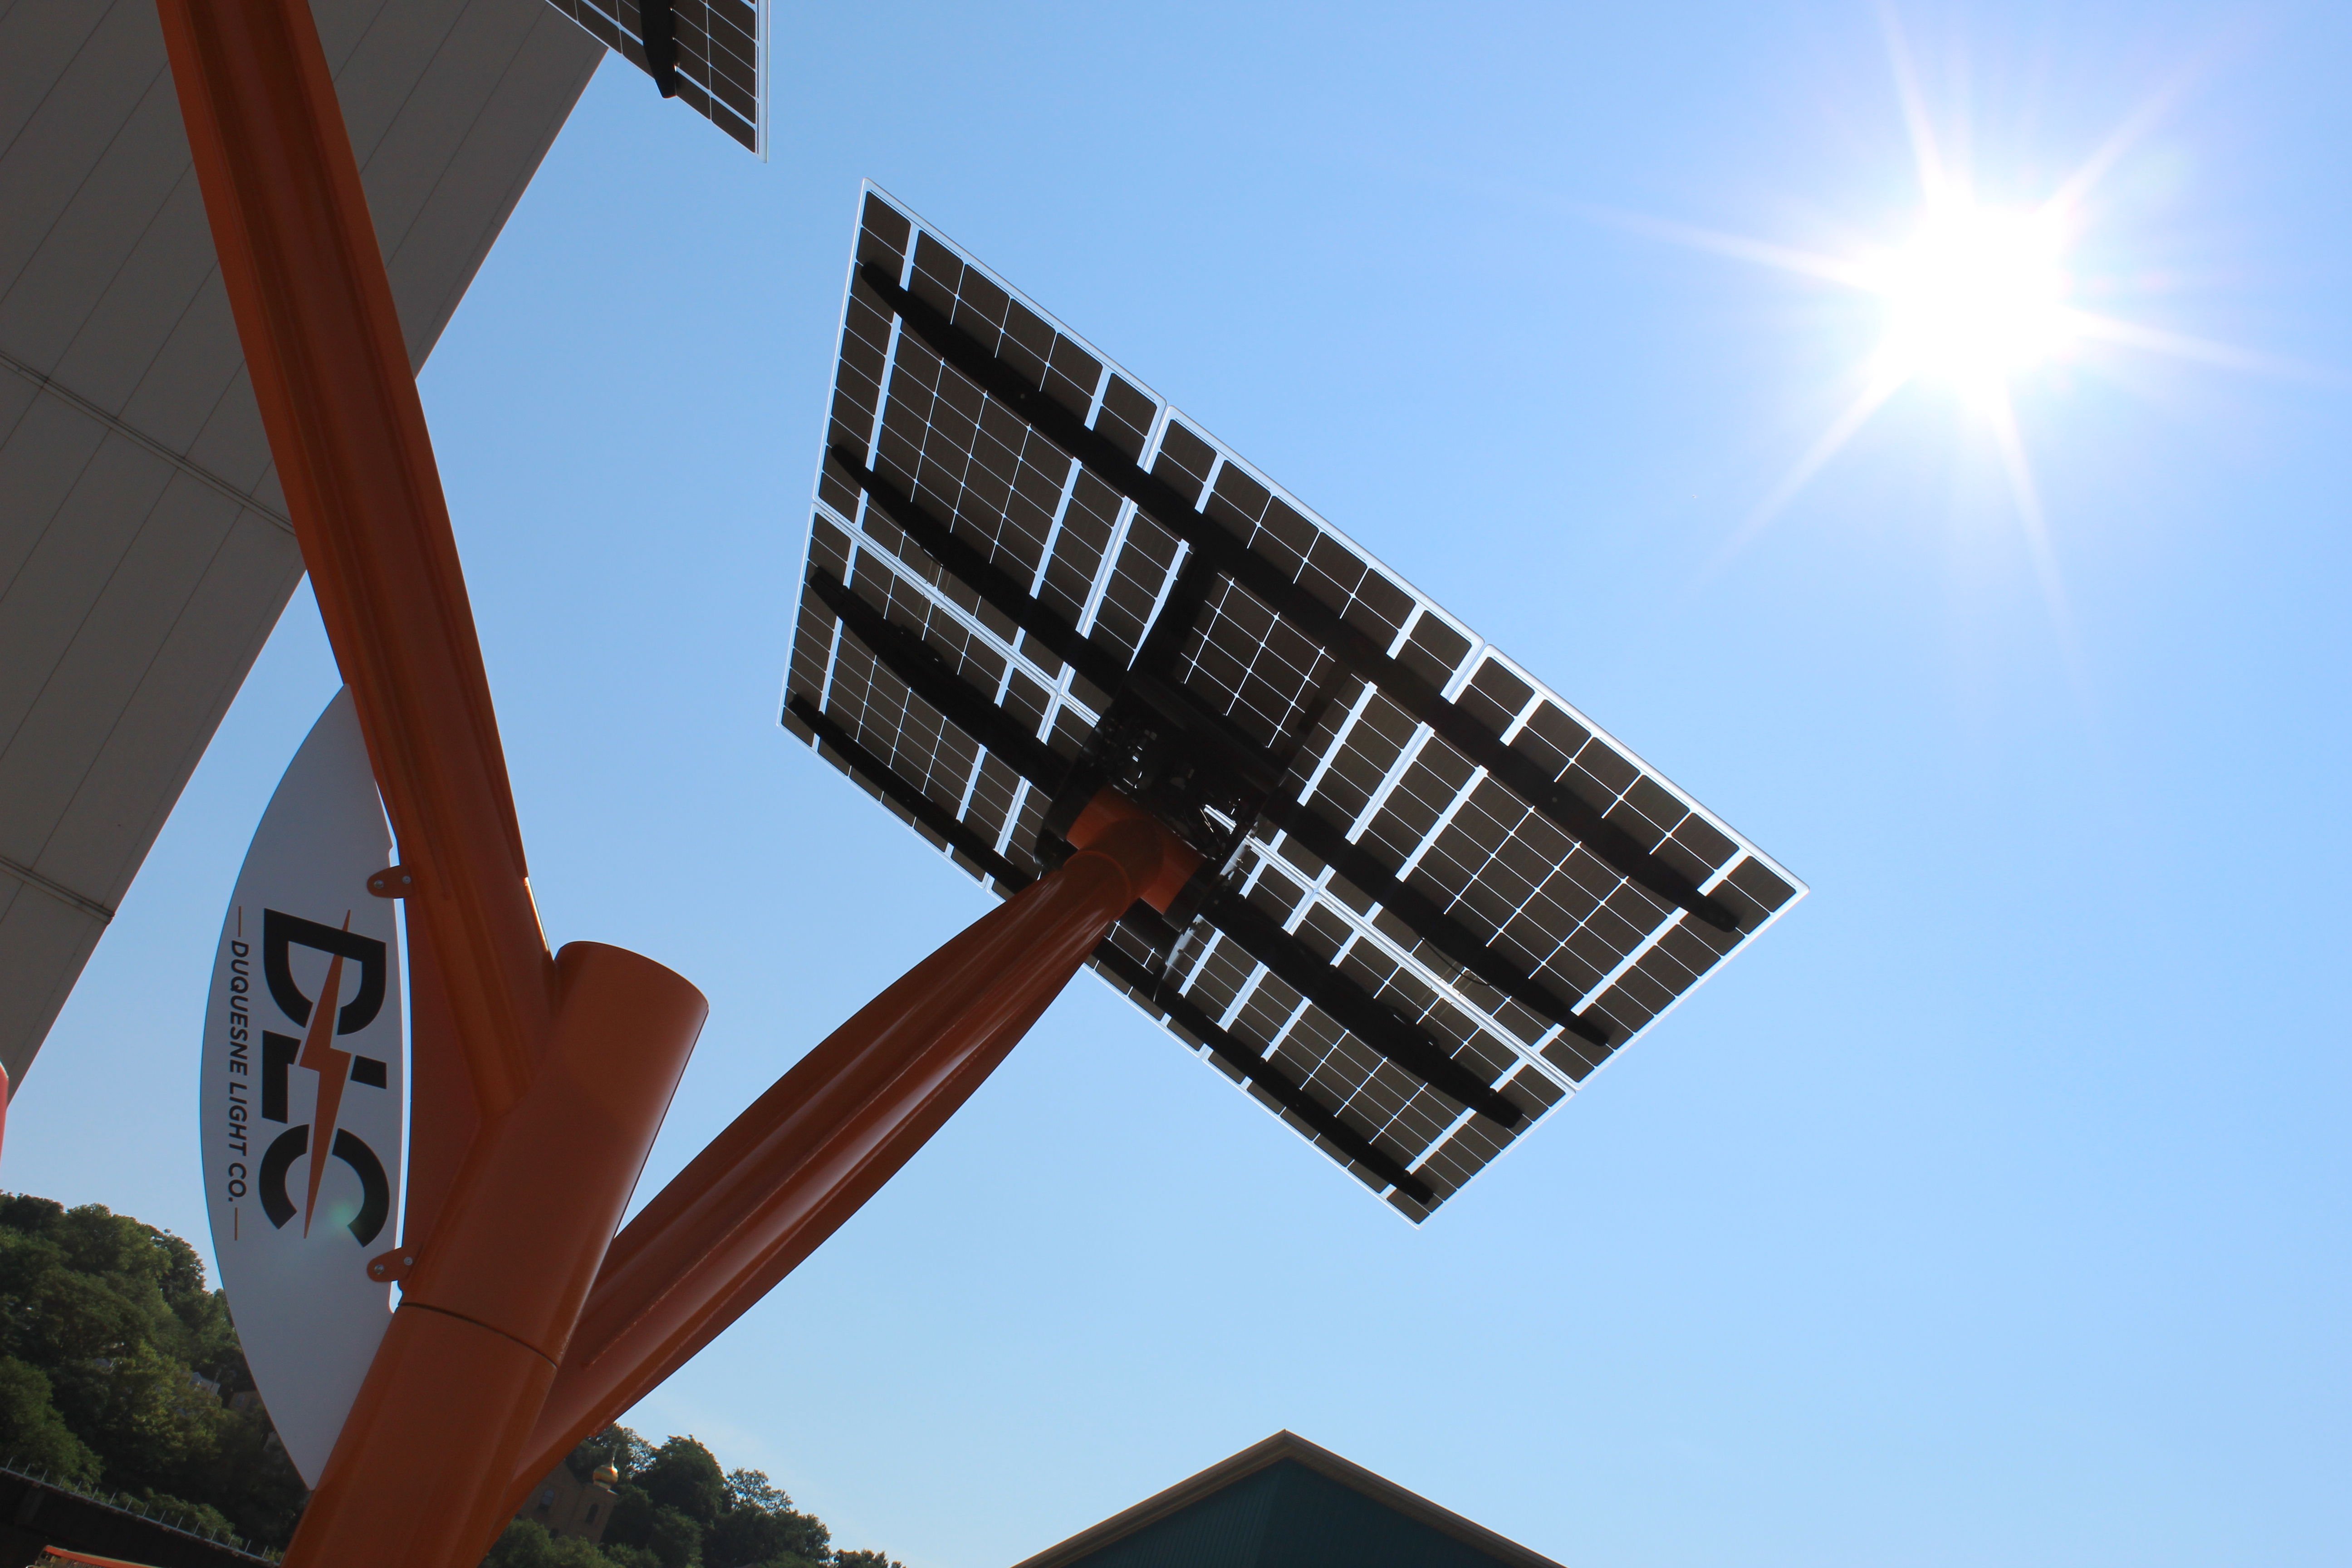 On a bright, cloudless day, the solar panels atop the tree harness plenty of sunlight to produce clean energy.